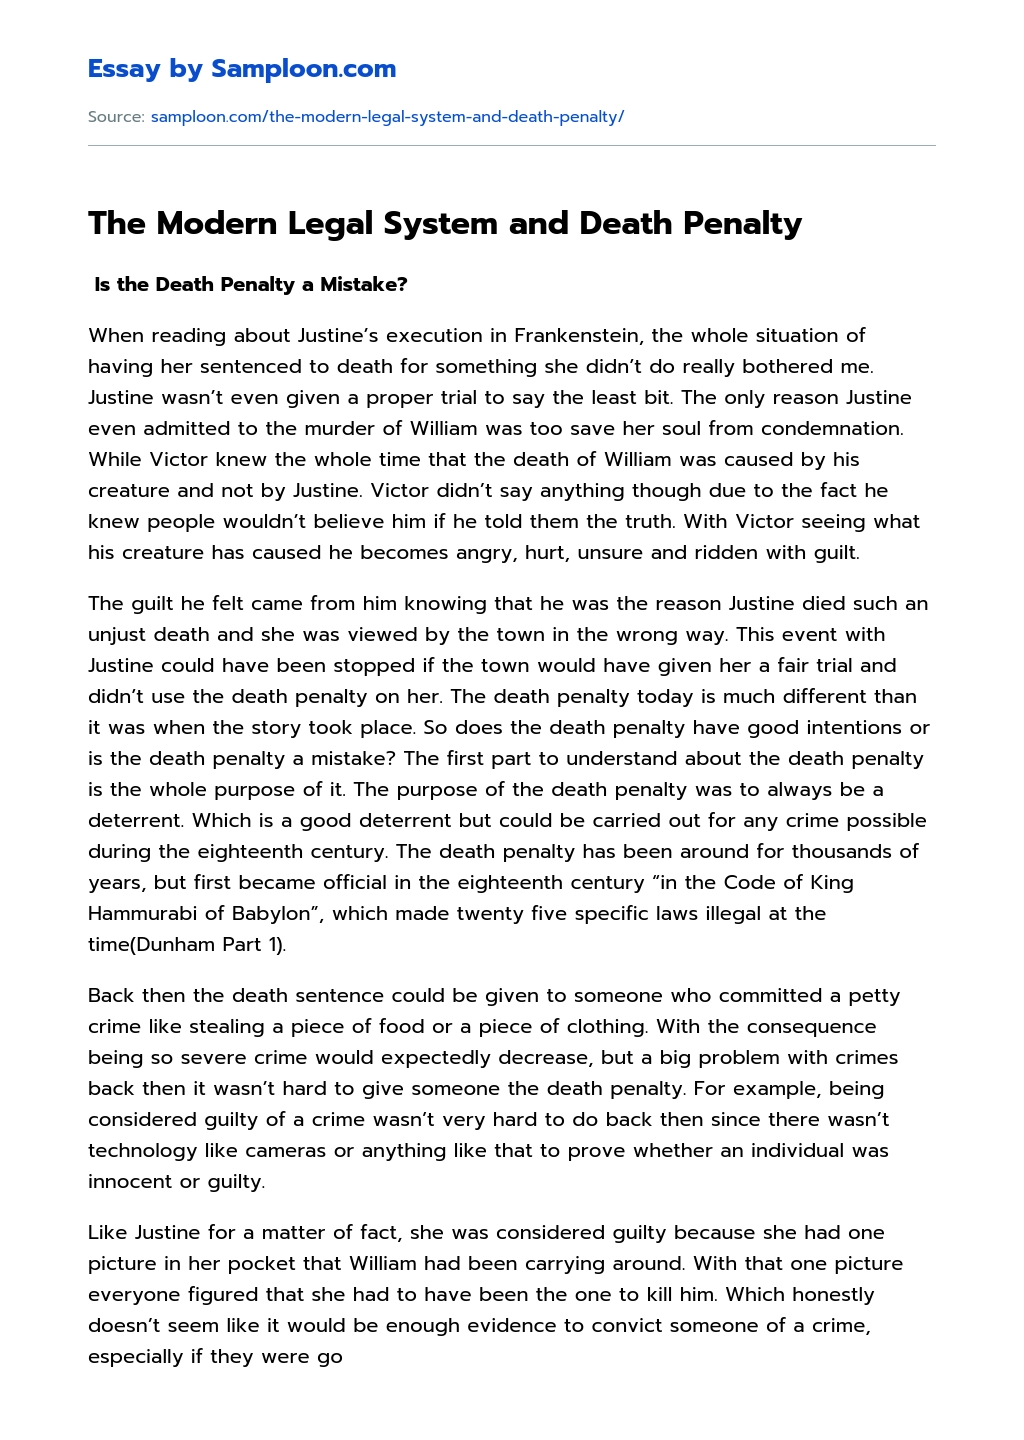 The Modern Legal System and Death Penalty essay